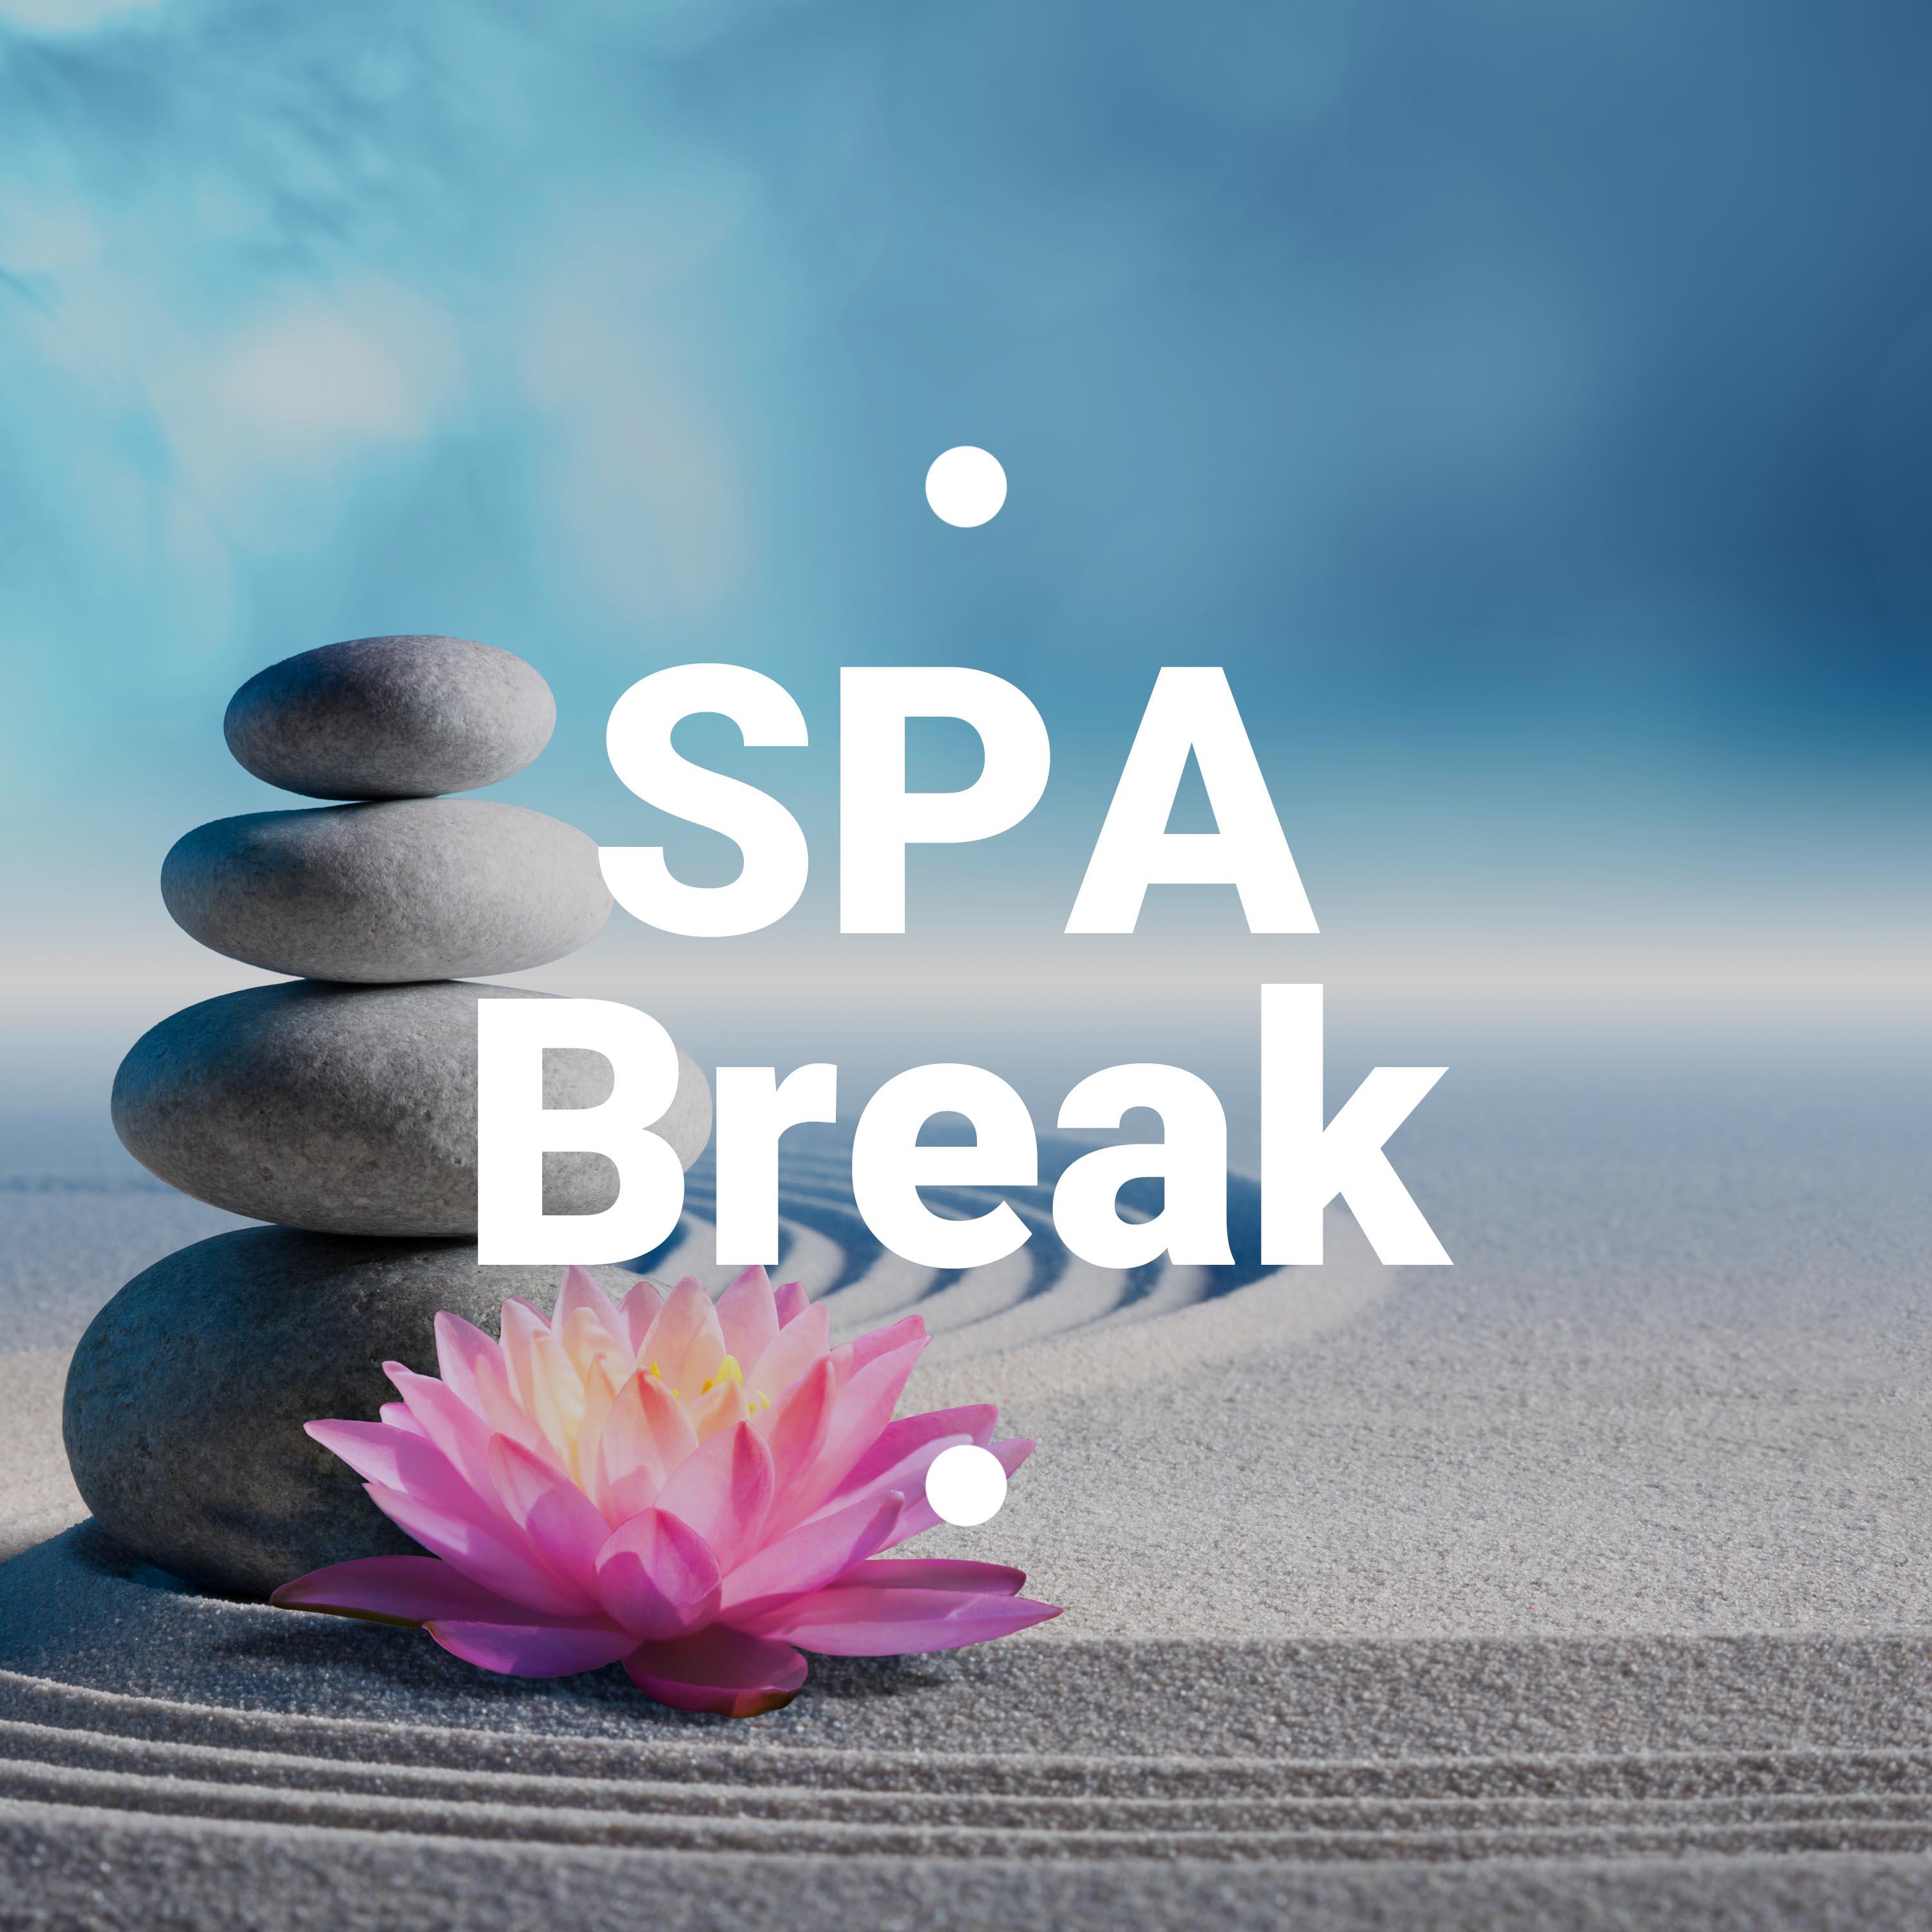 Spa Break - The 25 Best Luxury Spa Resorts Relaxing Songs with Nature Sounds, Piano and Asian Music